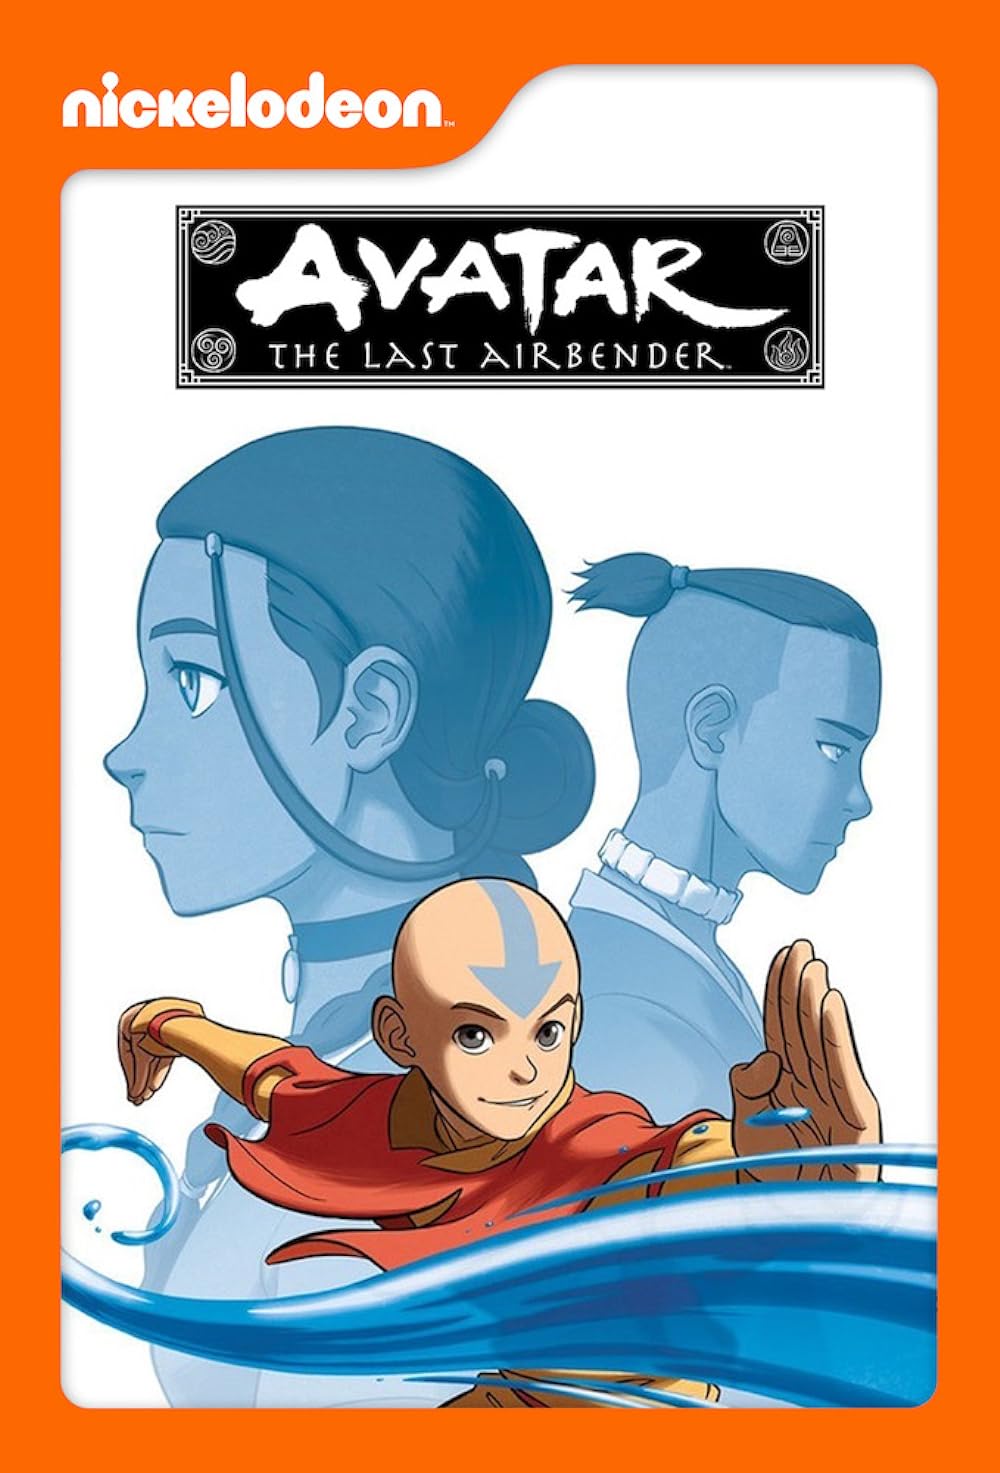 Avatar: The Last Airbender (February 22) - Streaming on NetflixAvatar: The Last Airbender, the highly anticipated live-action adaptation of the beloved animated series, is set to bring the rich, fantastical world and its characters to life in a new dimension. The series follows Aang, the young Avatar, on his quest to master the four elemental powers and save the world from the Fire Nation’s tyranny.